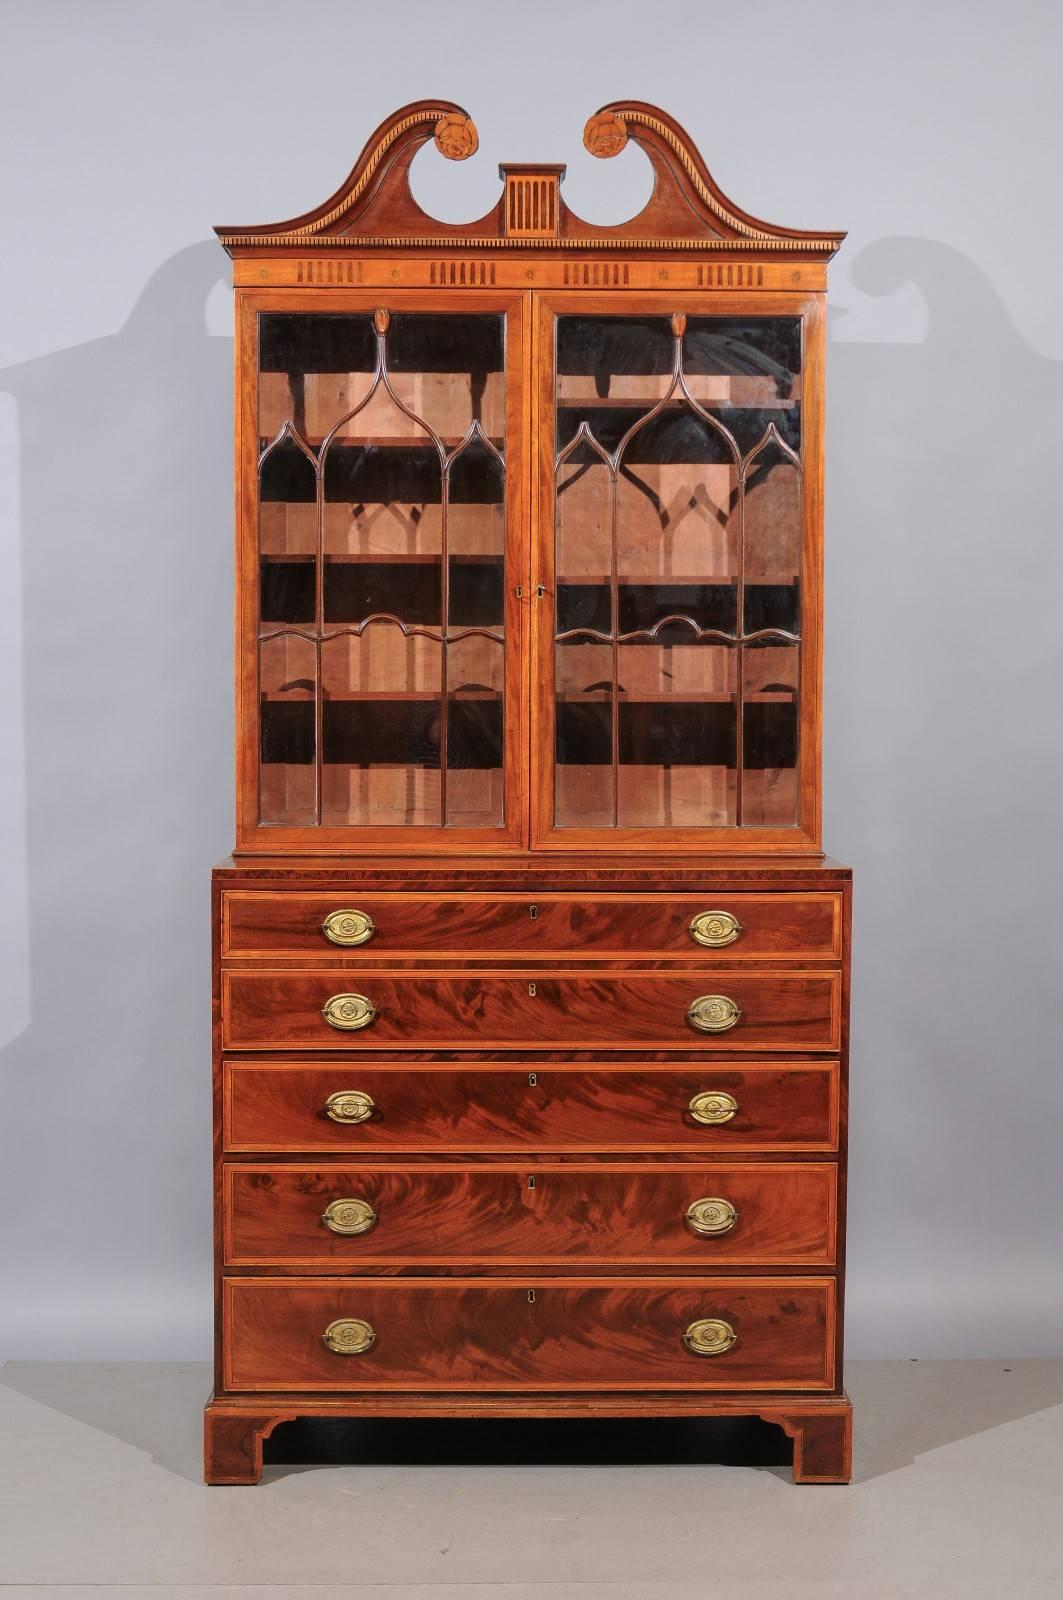 Early 19th century English George III inlaid secretary bookcase in mahogany and satinwood with two (2) glass front cabinet doors above and three (3) drawers and secretary drawer with fitted interior below, bracket feet, and swan neck pediment.